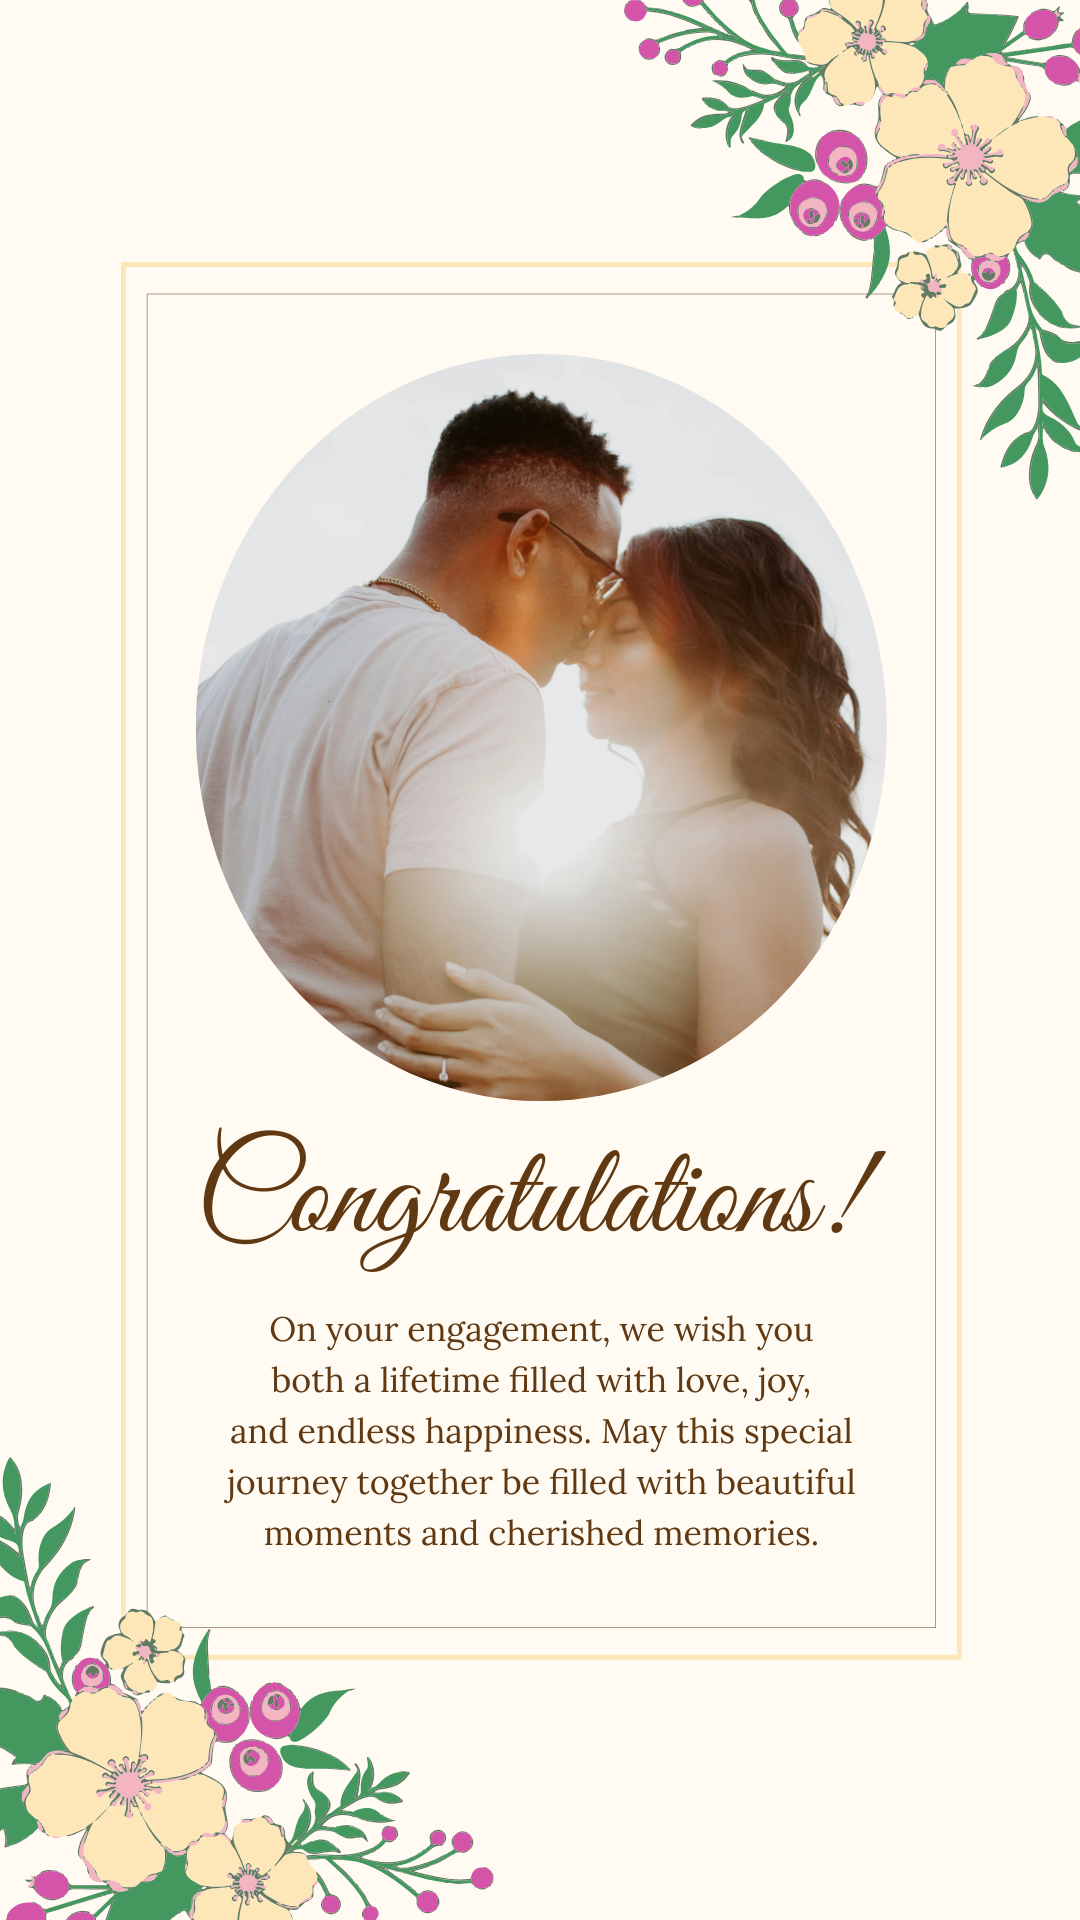 Congratulations Card for Engagement